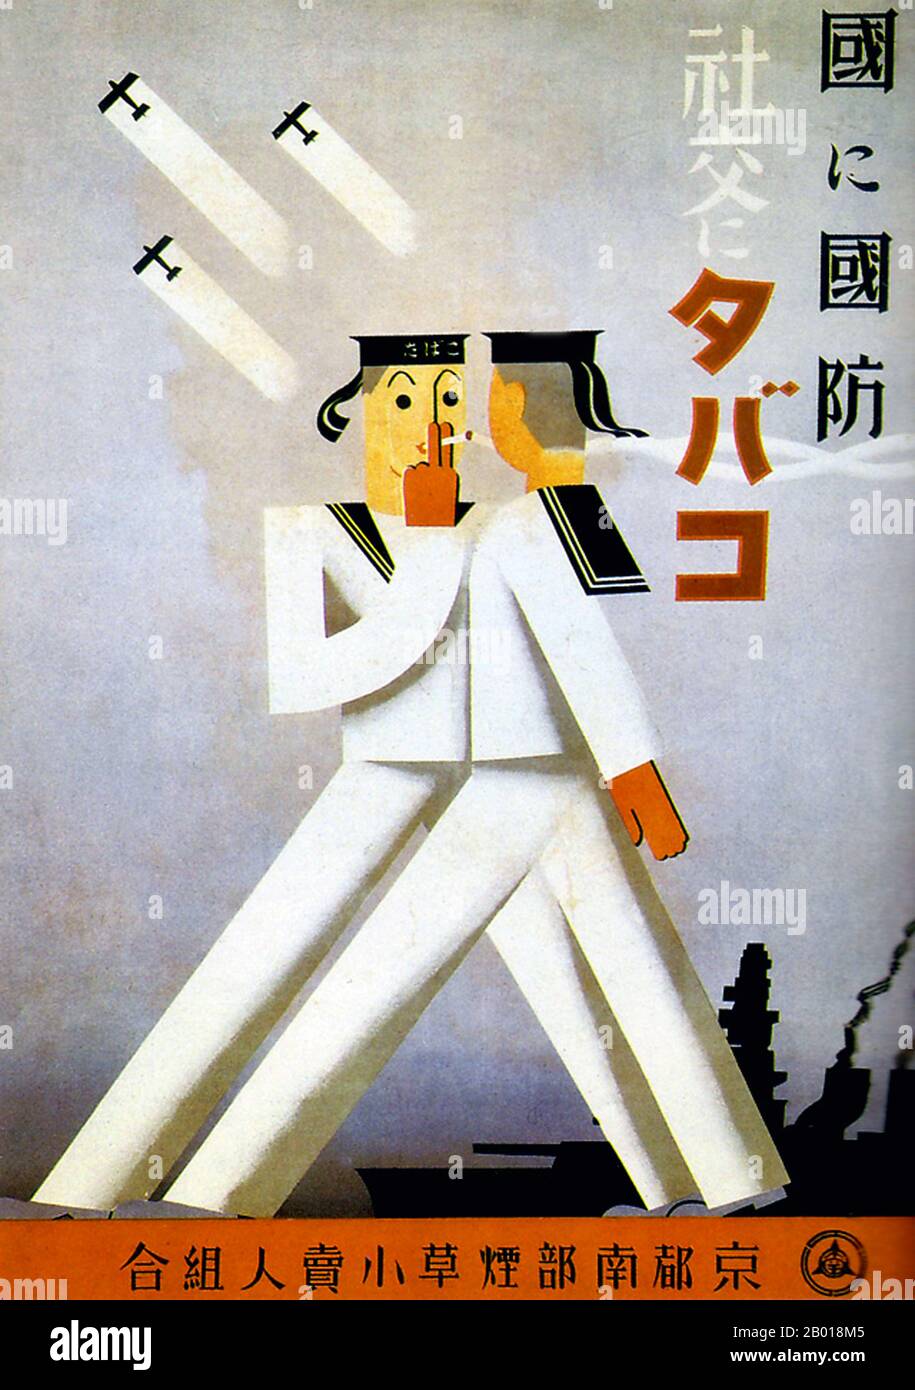 Japan: 'Defense for country, tobacco for society'. Advertising poster for the South Kyoto Tobacco Sellers' Union, 1937.  Militarism, albeit in stylised form, as two naval automata exhange a light beneath three warplanes. The silhouette of a naval warship is in the background. Stock Photo